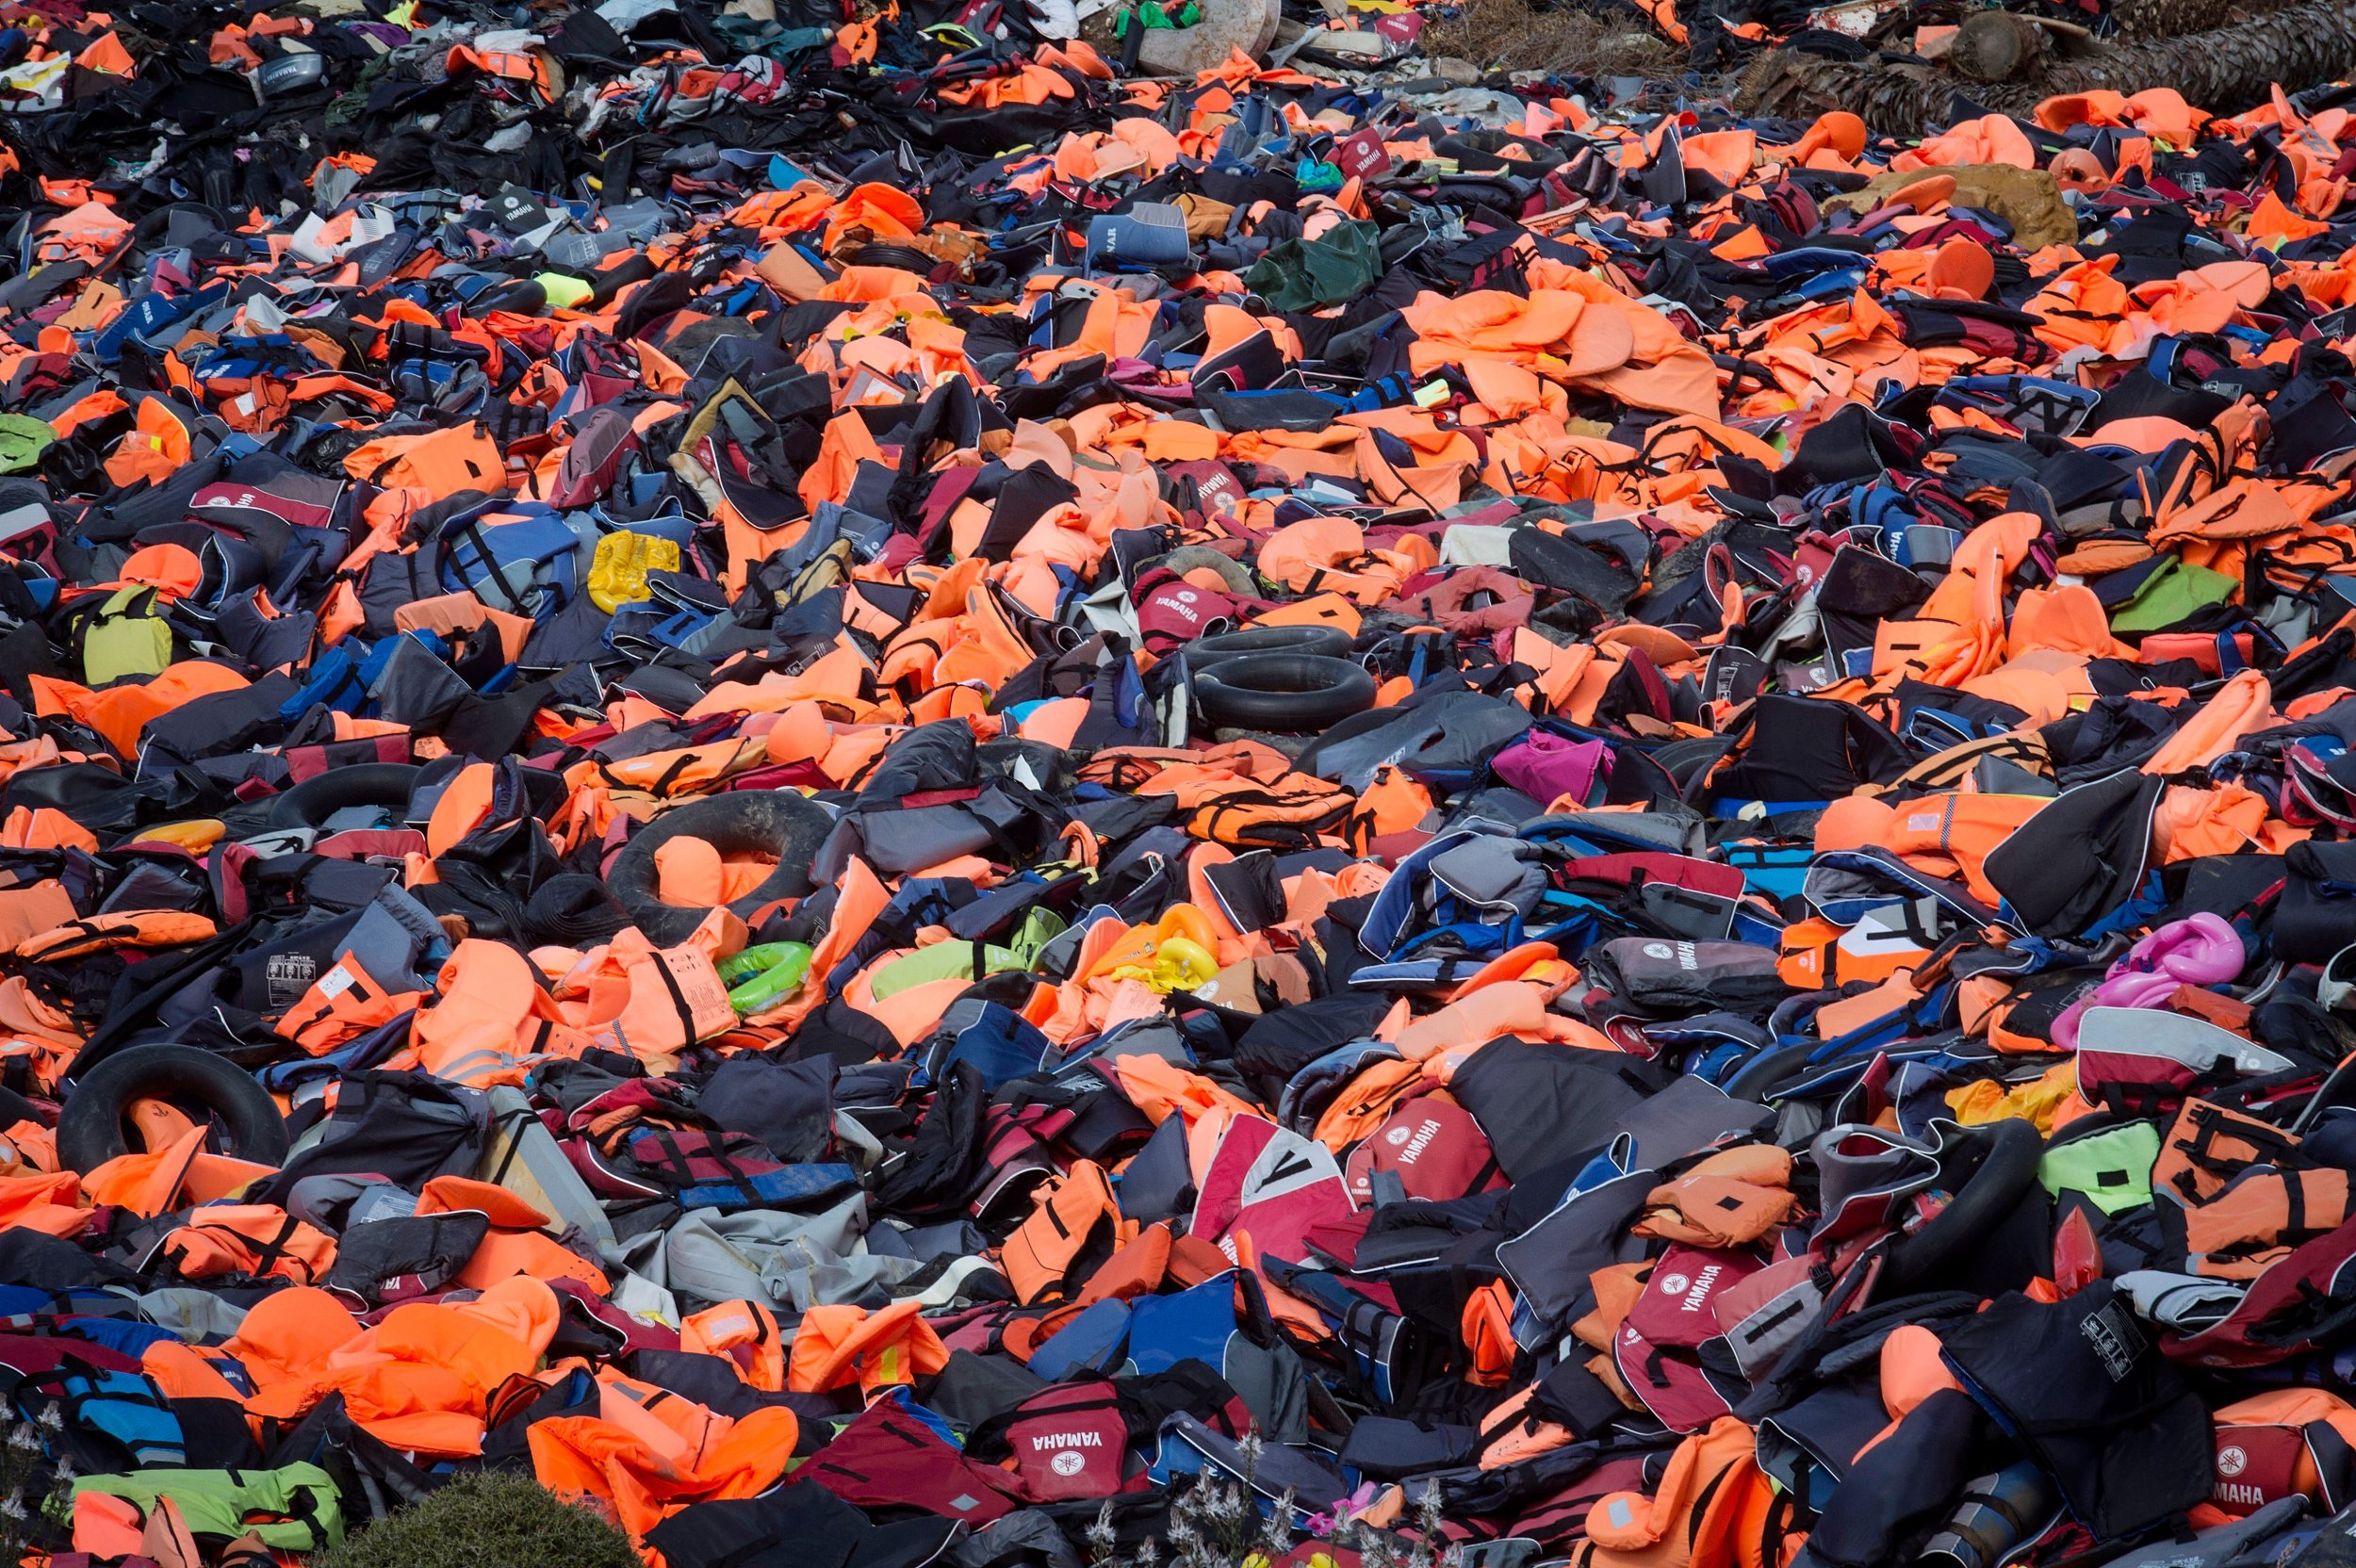 Charity Warns Of Danger Of Greek Refugee Camps 'Bursting At The Seams'